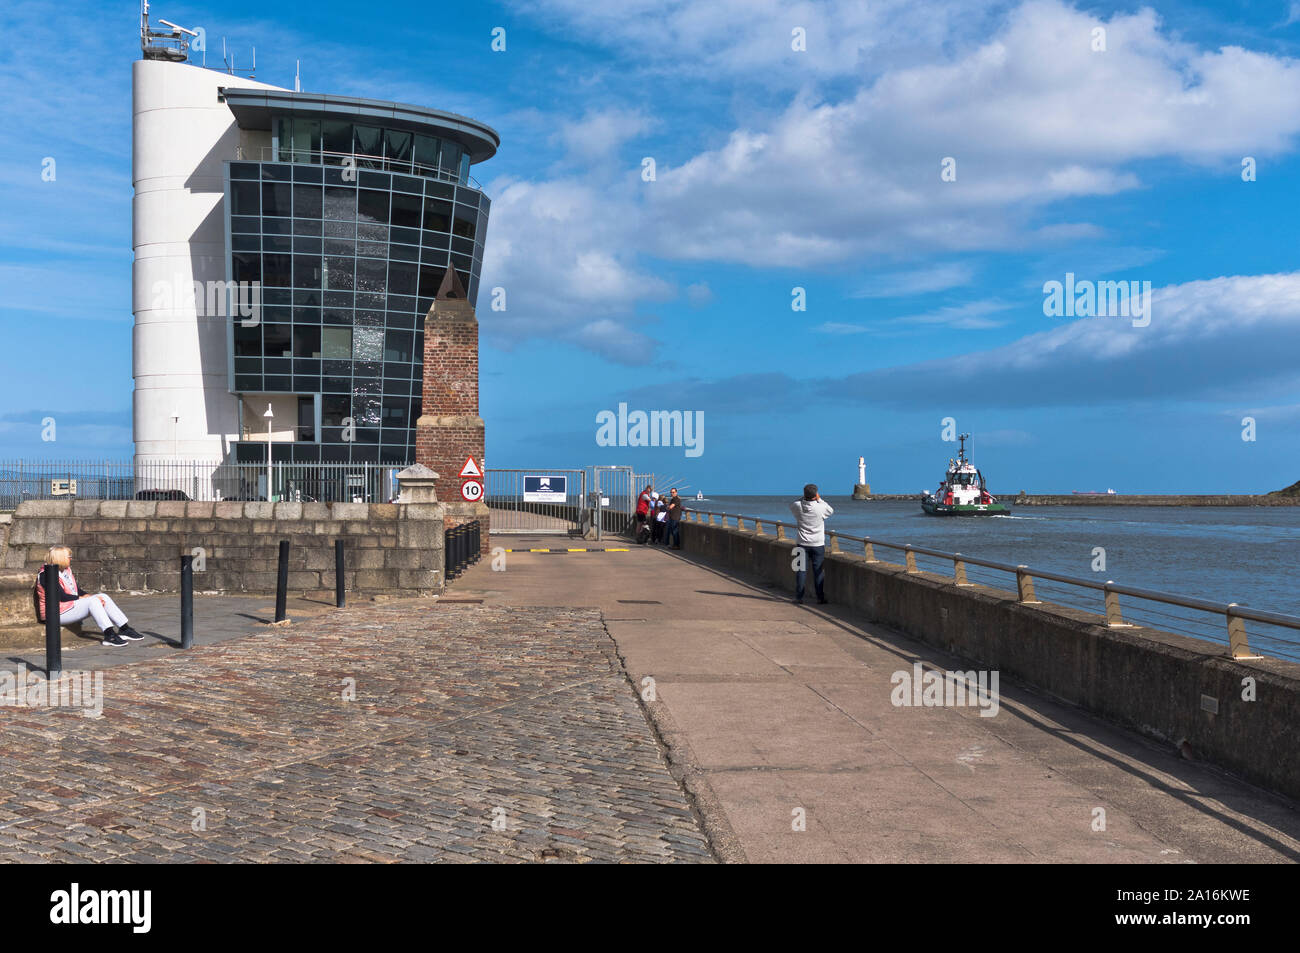 dh Harbour Masters building HARBOUR ABERDEEN Modern control tower harbours entrance tug leaving people footdee Stock Photo